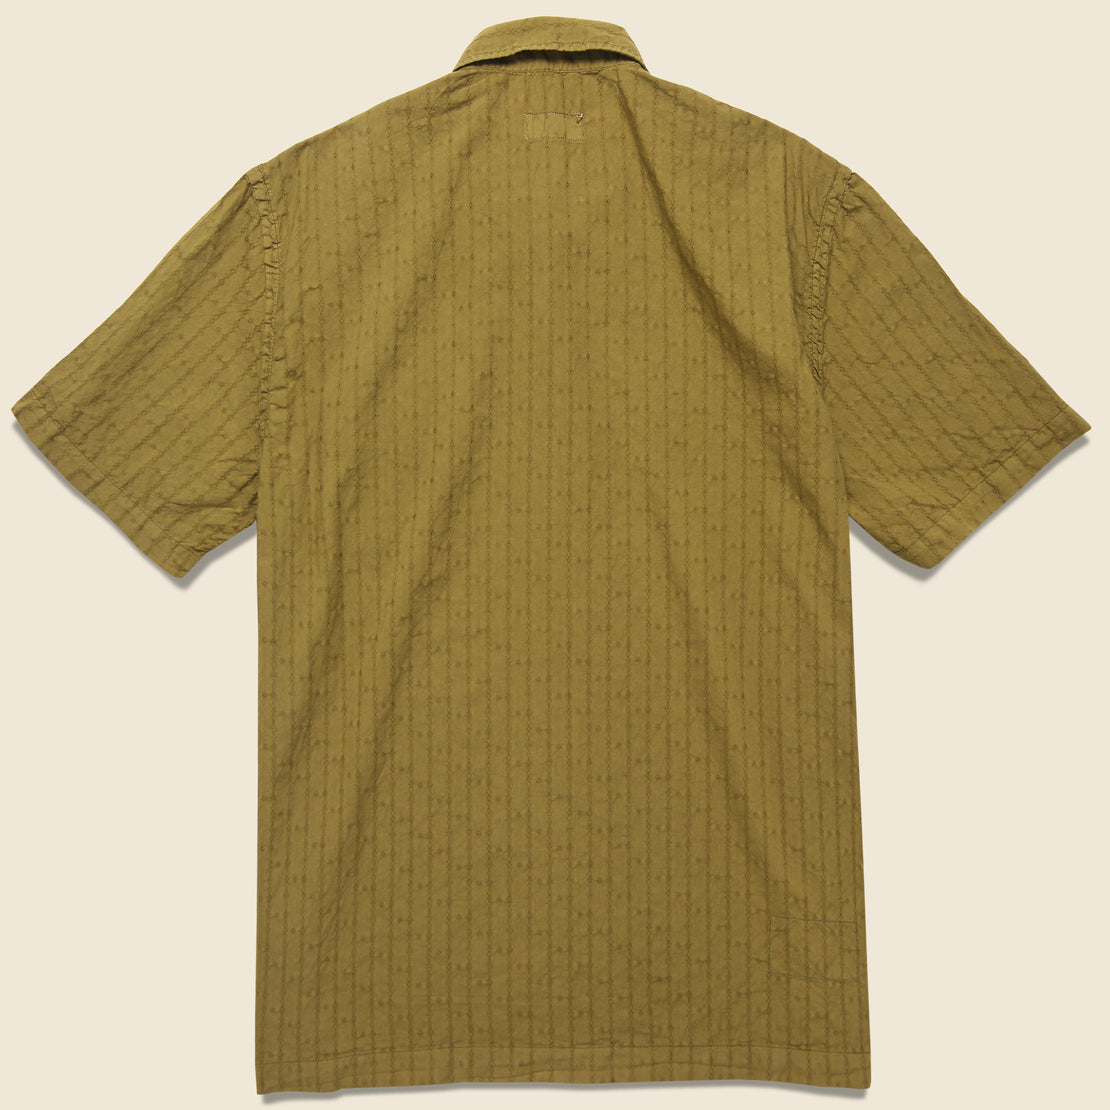 Road Shirt - Khaki Jacquard - Universal Works - STAG Provisions - Tops - S/S Woven - Other Pattern